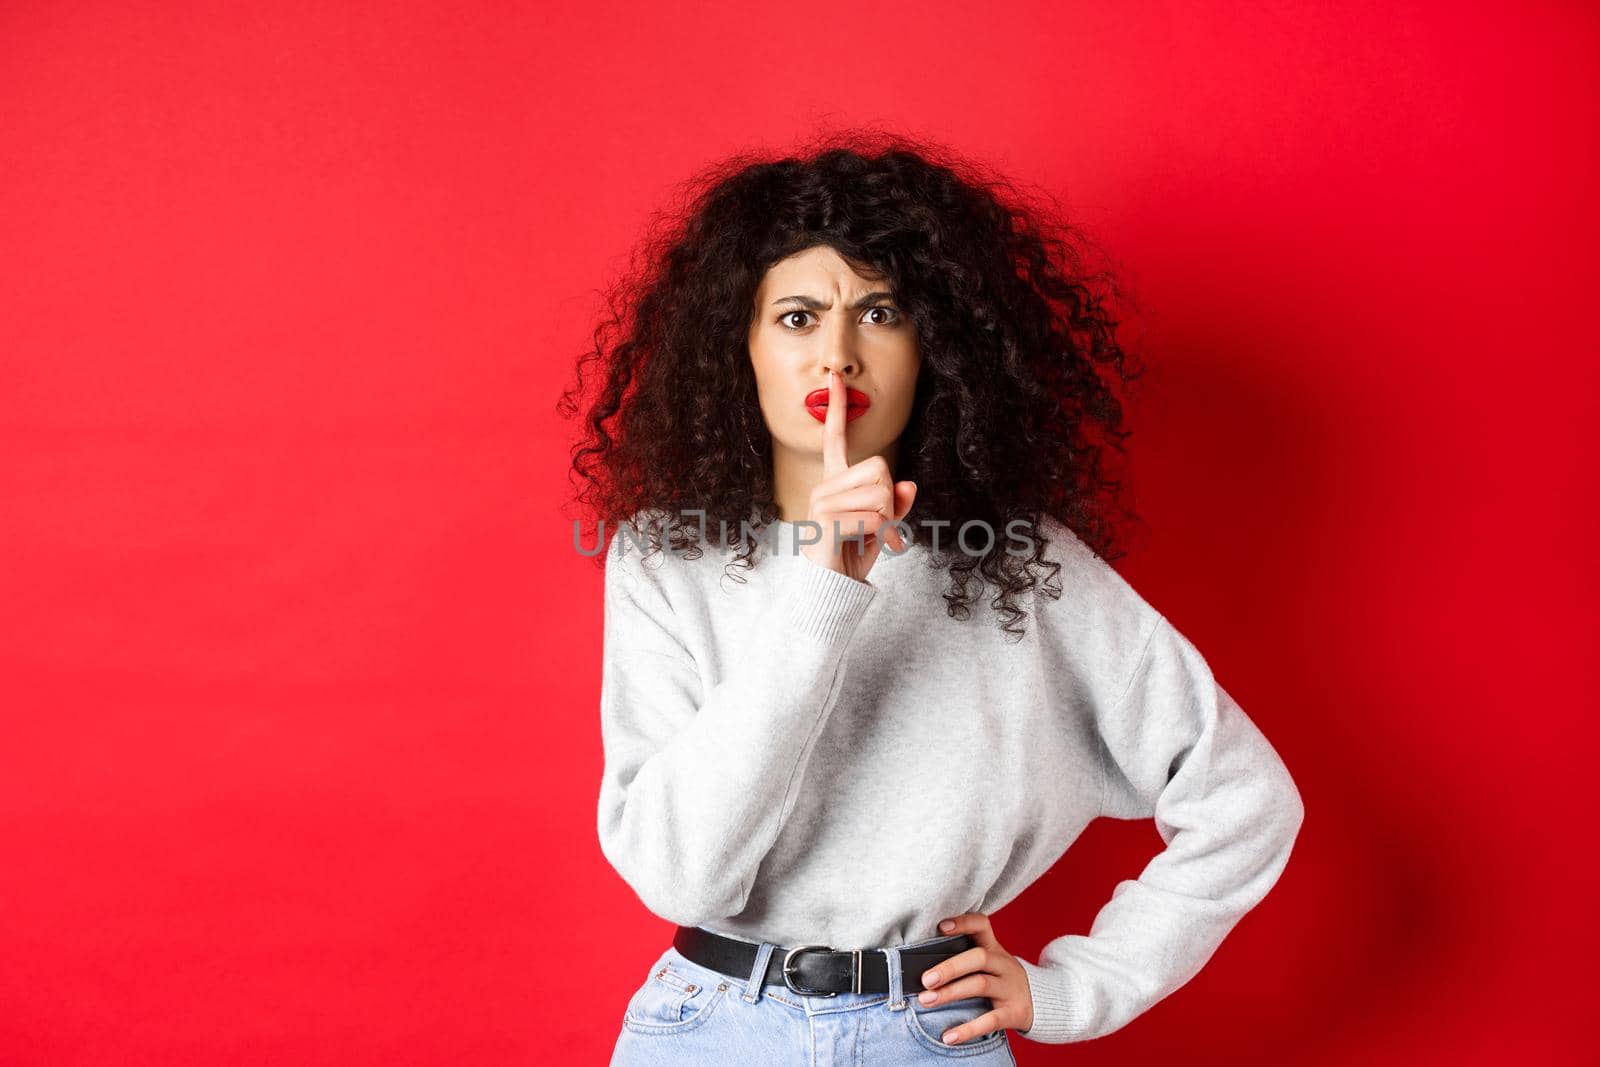 Angry young woman with curly hair and red lips, frowning and shushing, tell to be quiet, make taboo gesture to keep mouth shut, standing on red background.